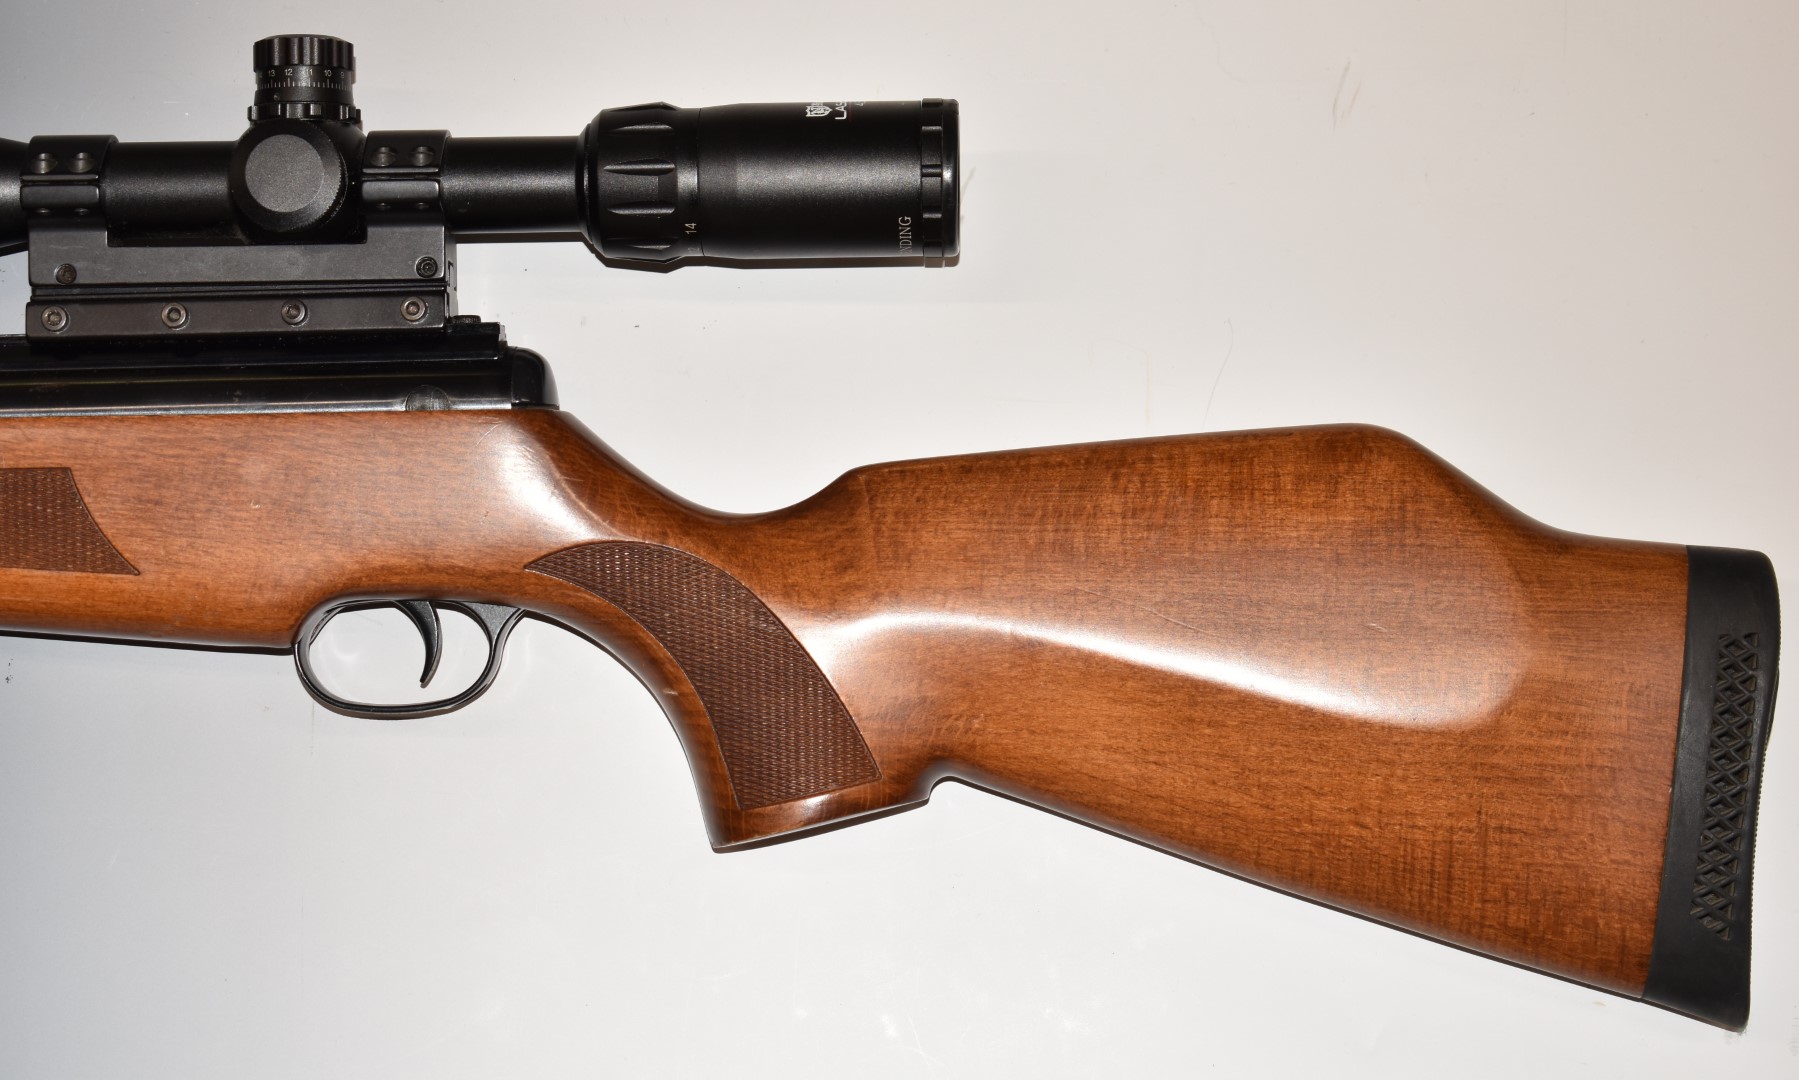 BSA .22 air rifle with chequered semi-pistol grip and forend, raised cheek piece, sound moderator - Image 7 of 10